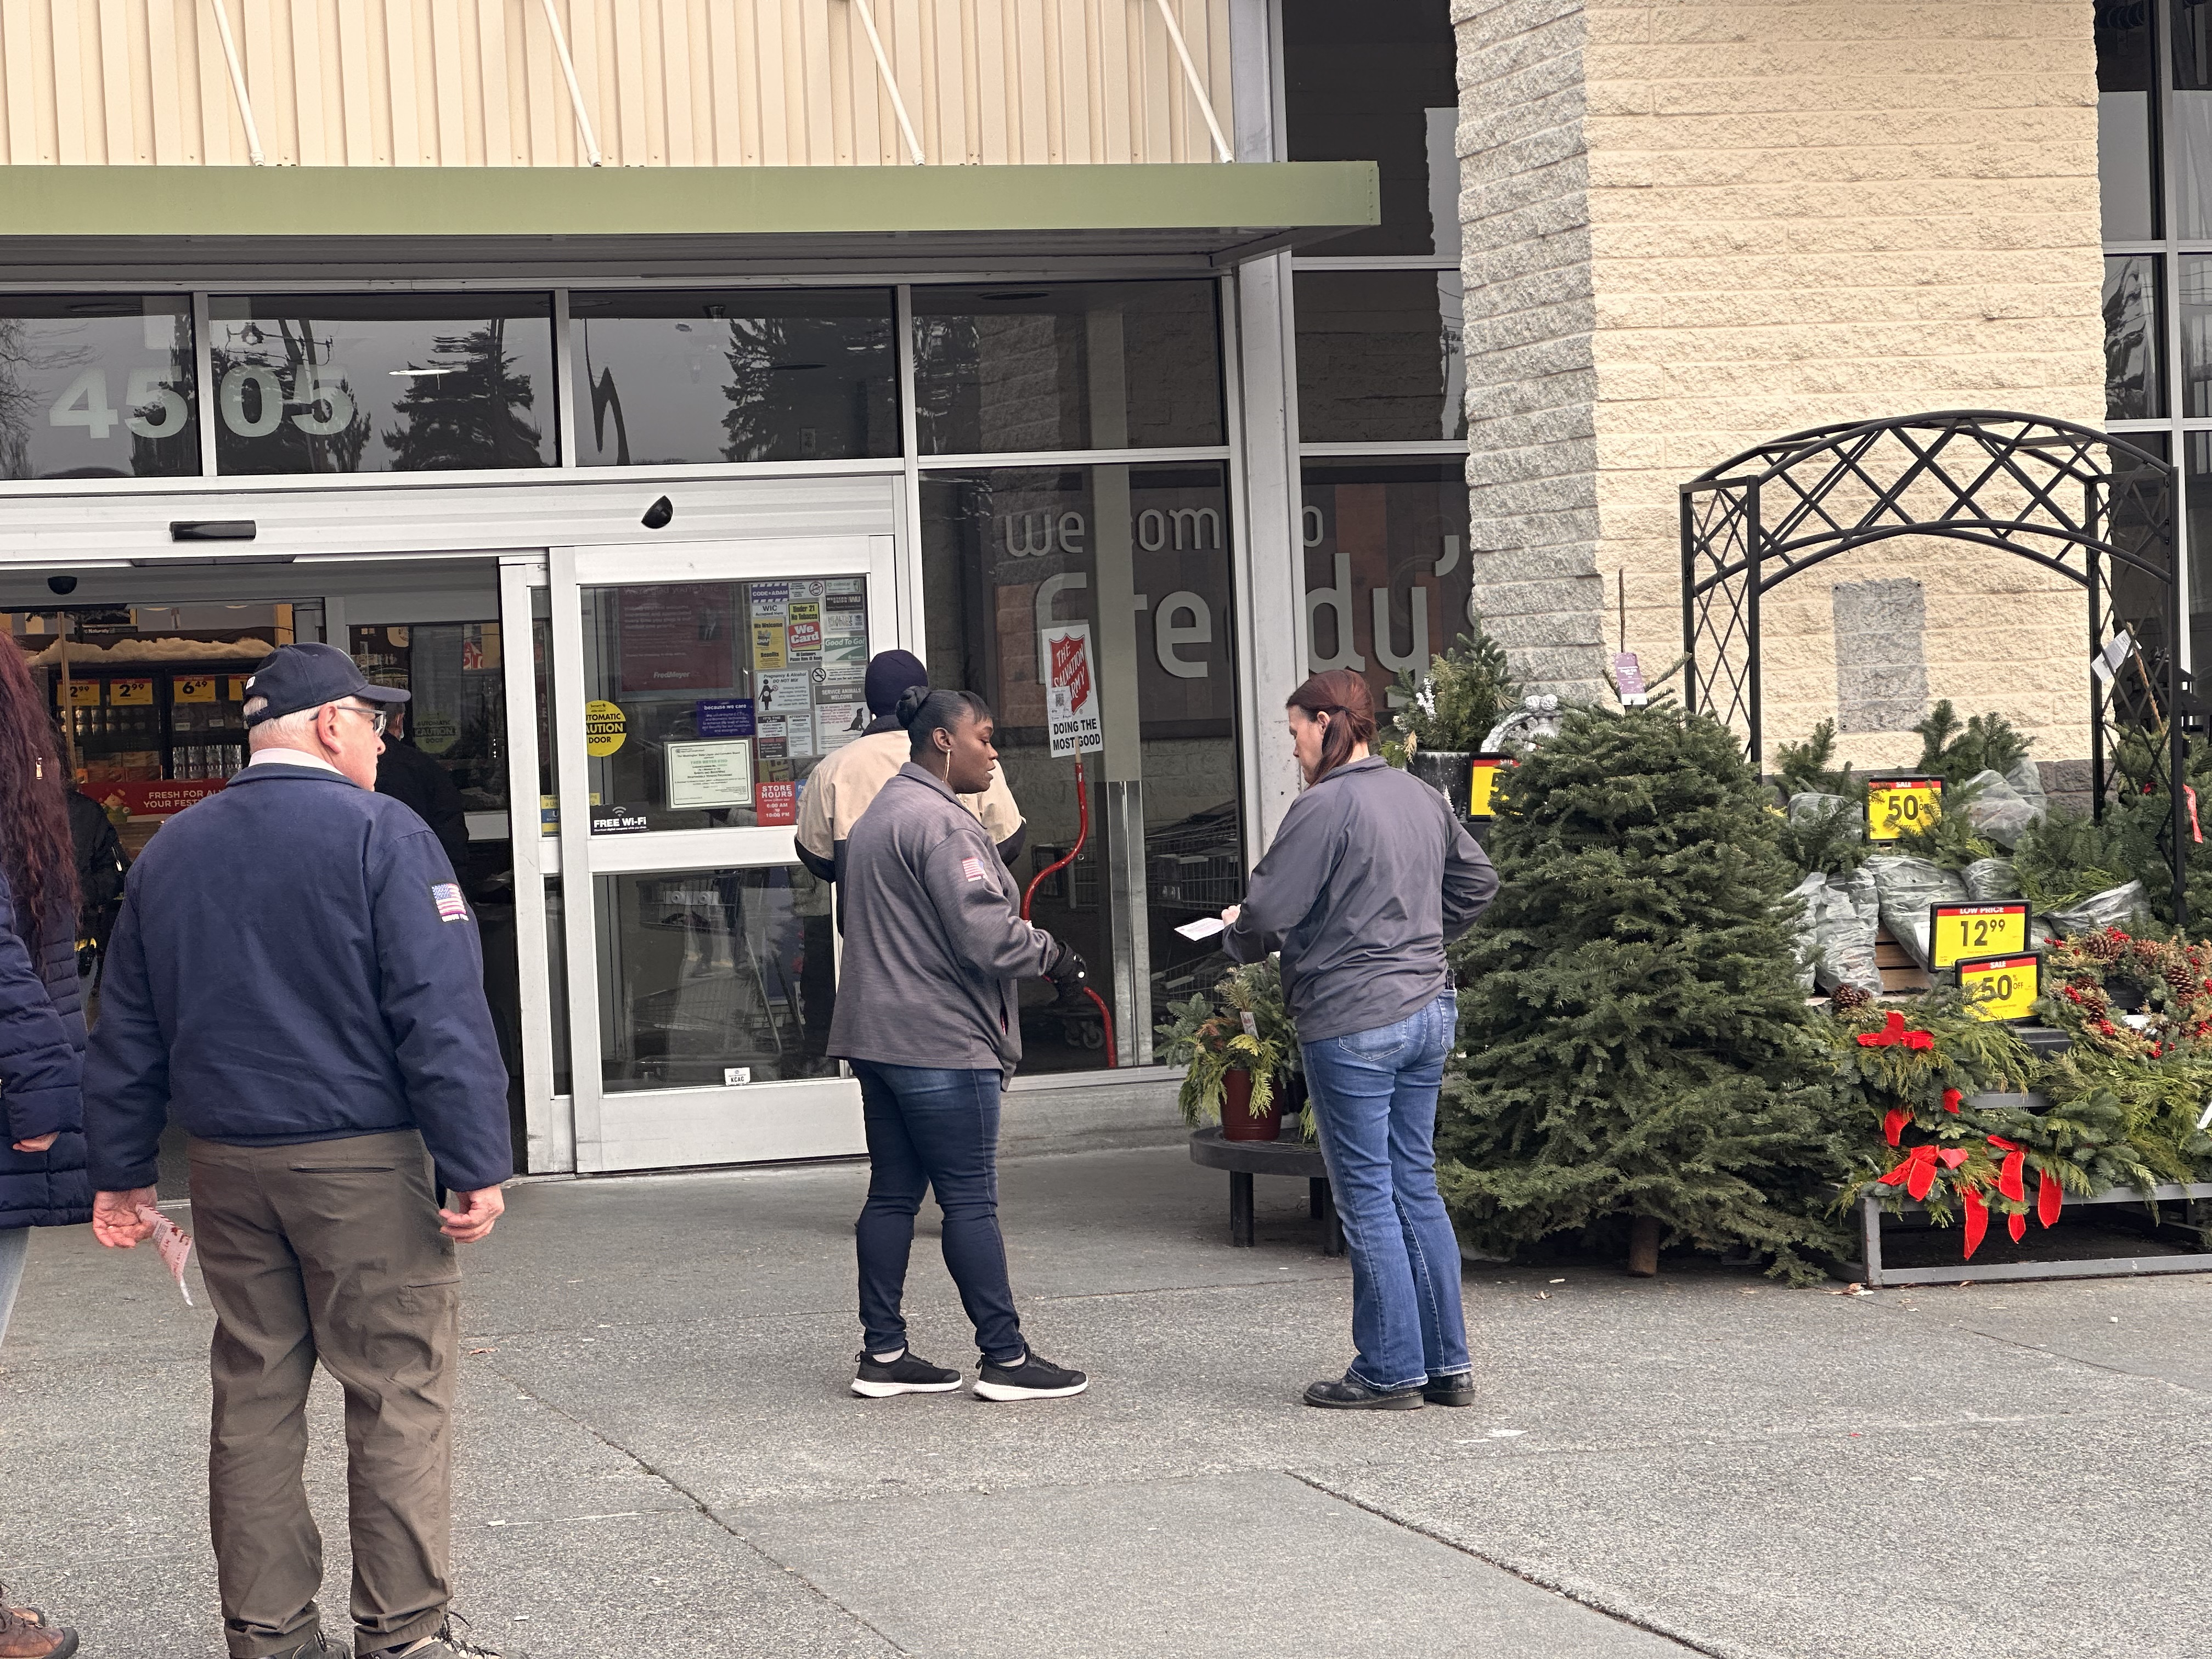 On December 16, grocery store workers and their union representatives passed out leaflets on the problems they've had with their pay in recent months. Photo by Lauren Gallup.